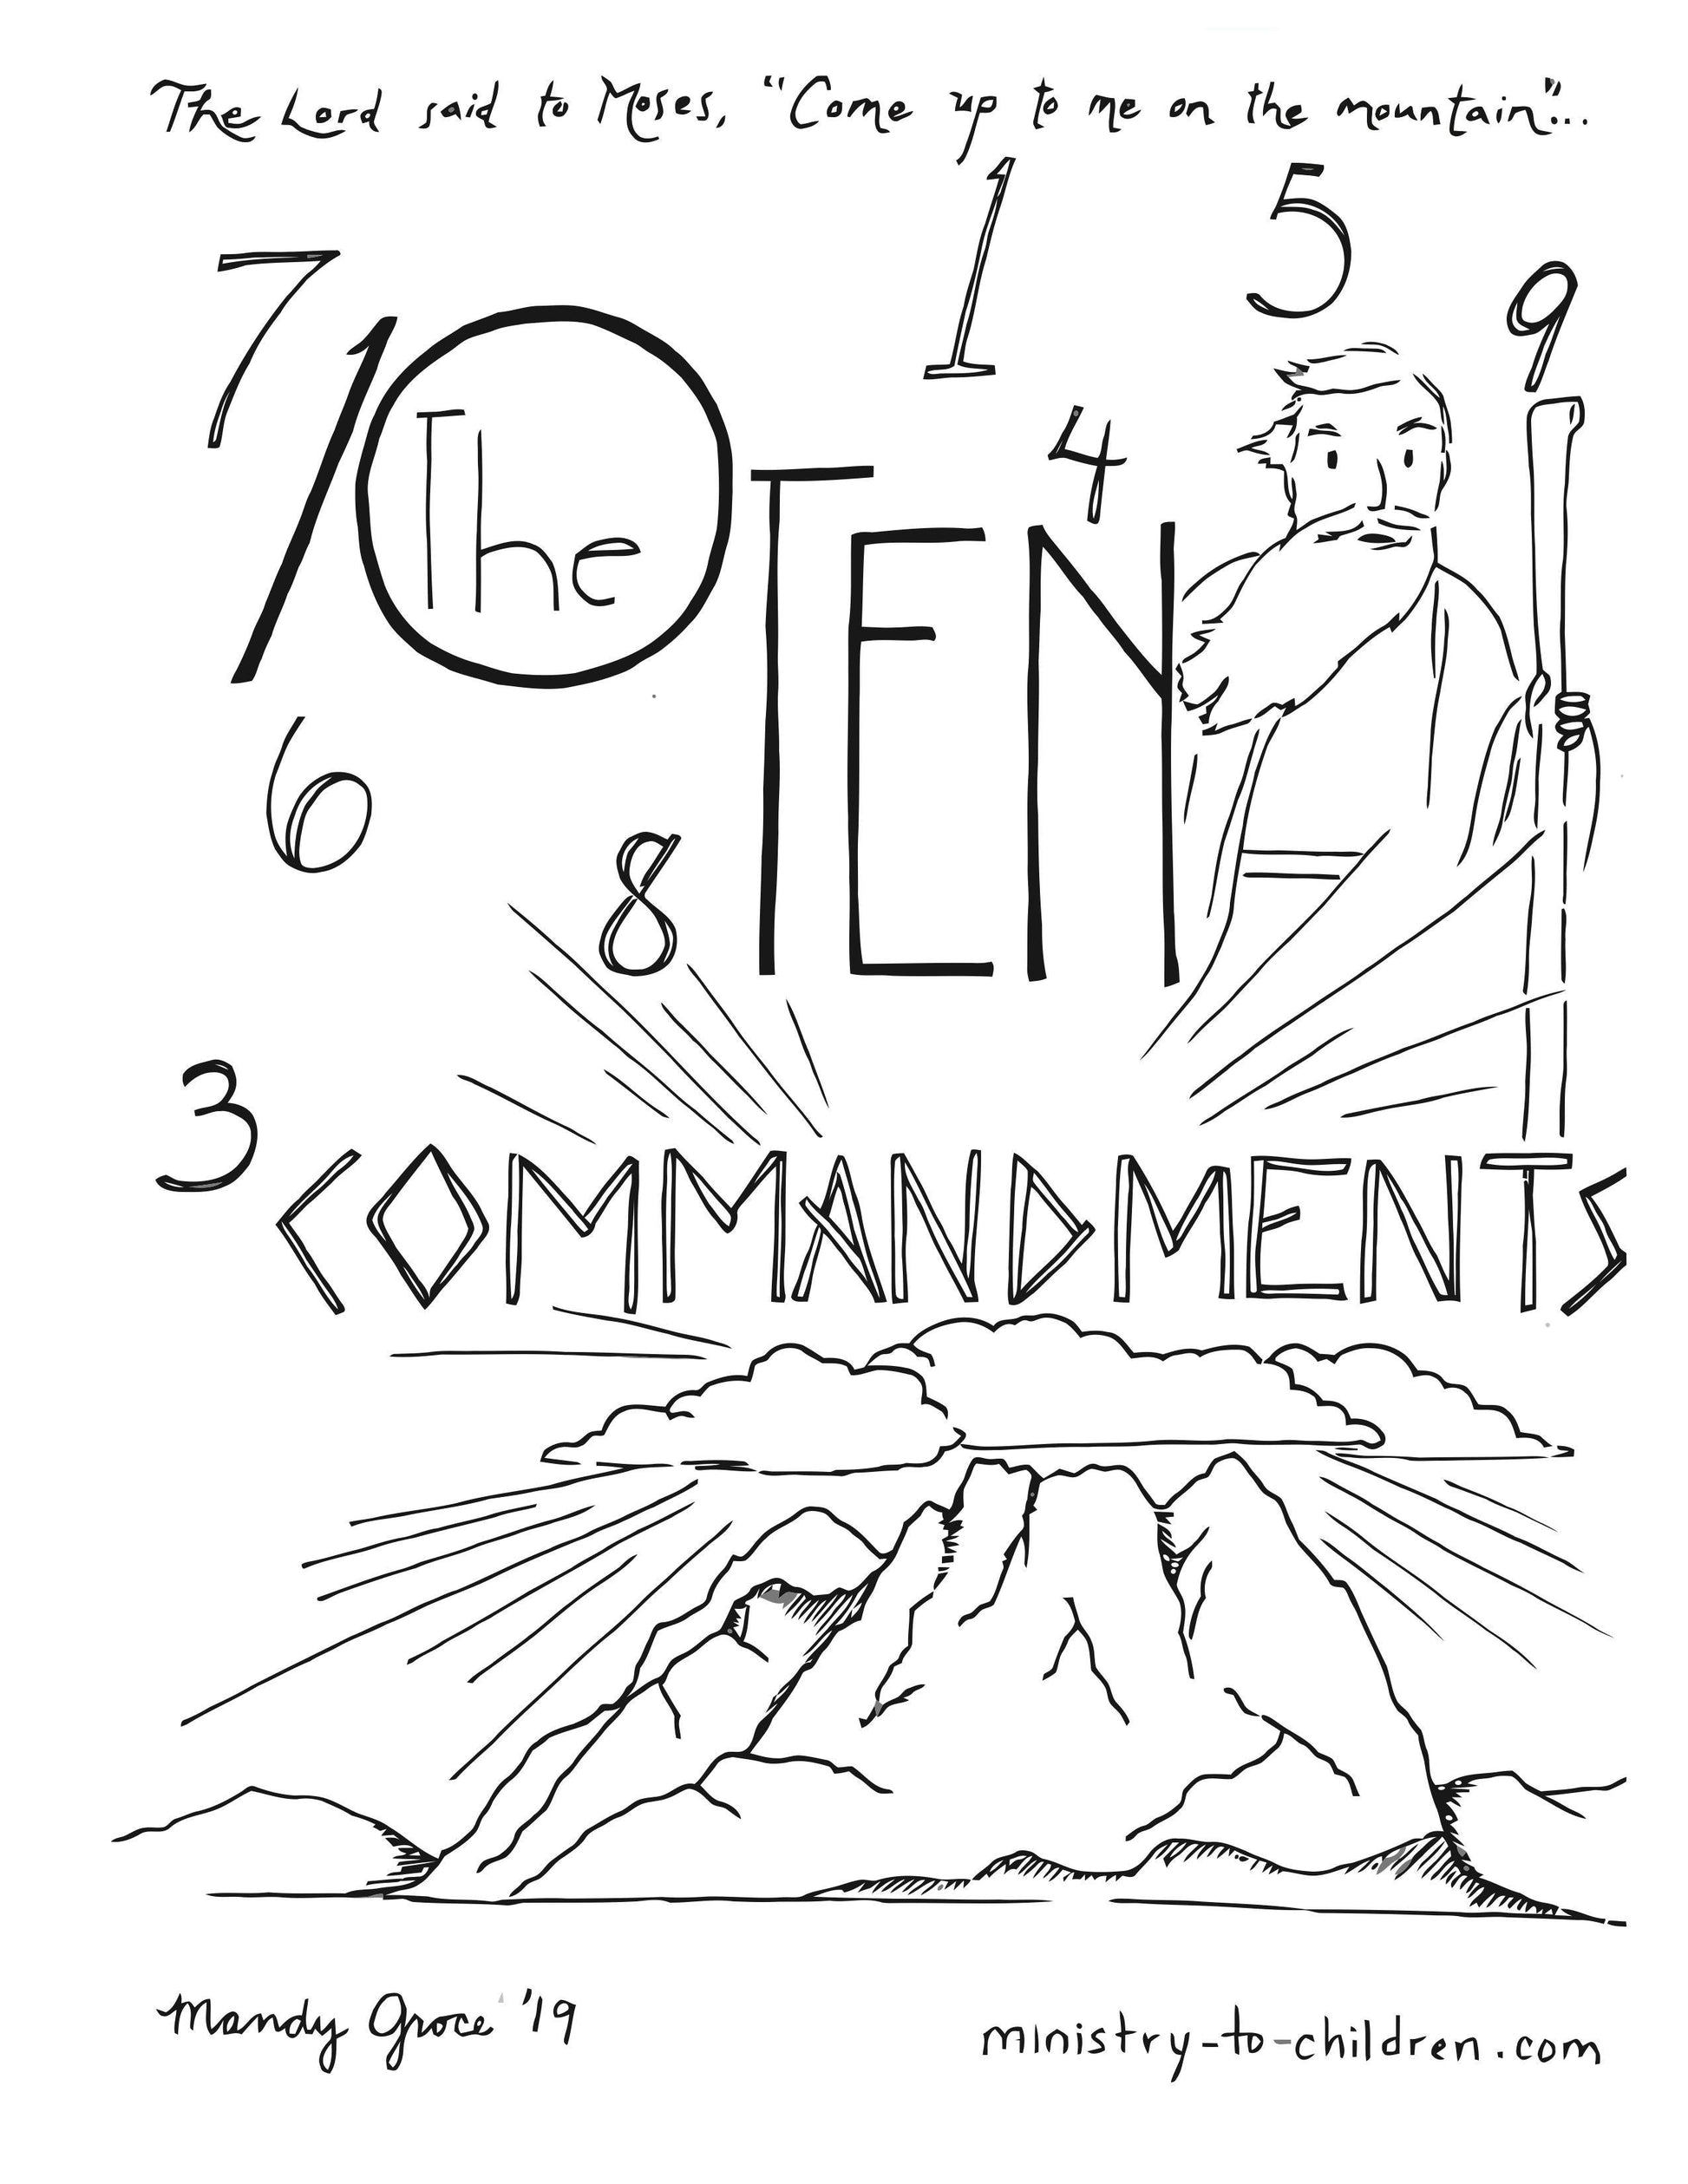 The Ten Commandments: Free Sample Lesson (download only) - Sunday School Store 